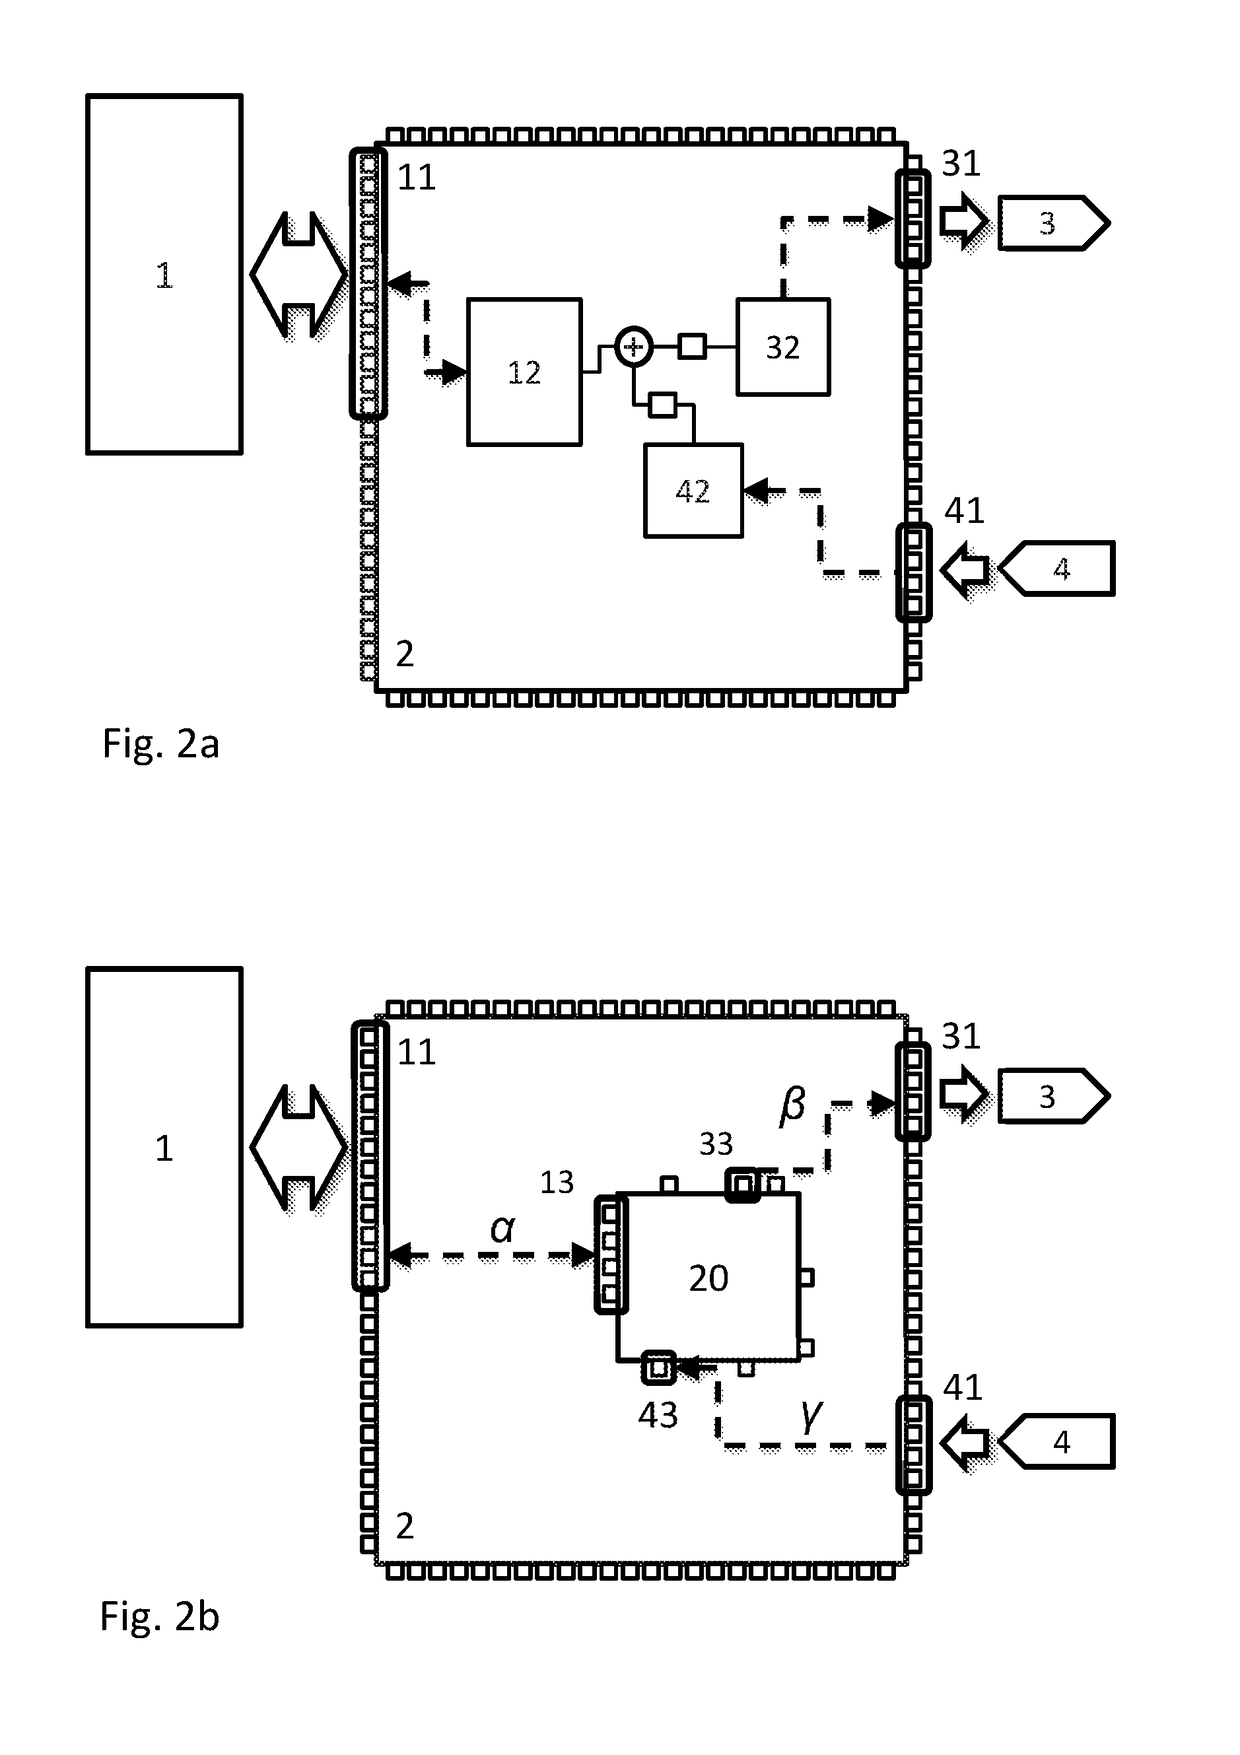 Method for determining the power consumption of a programmable logic device